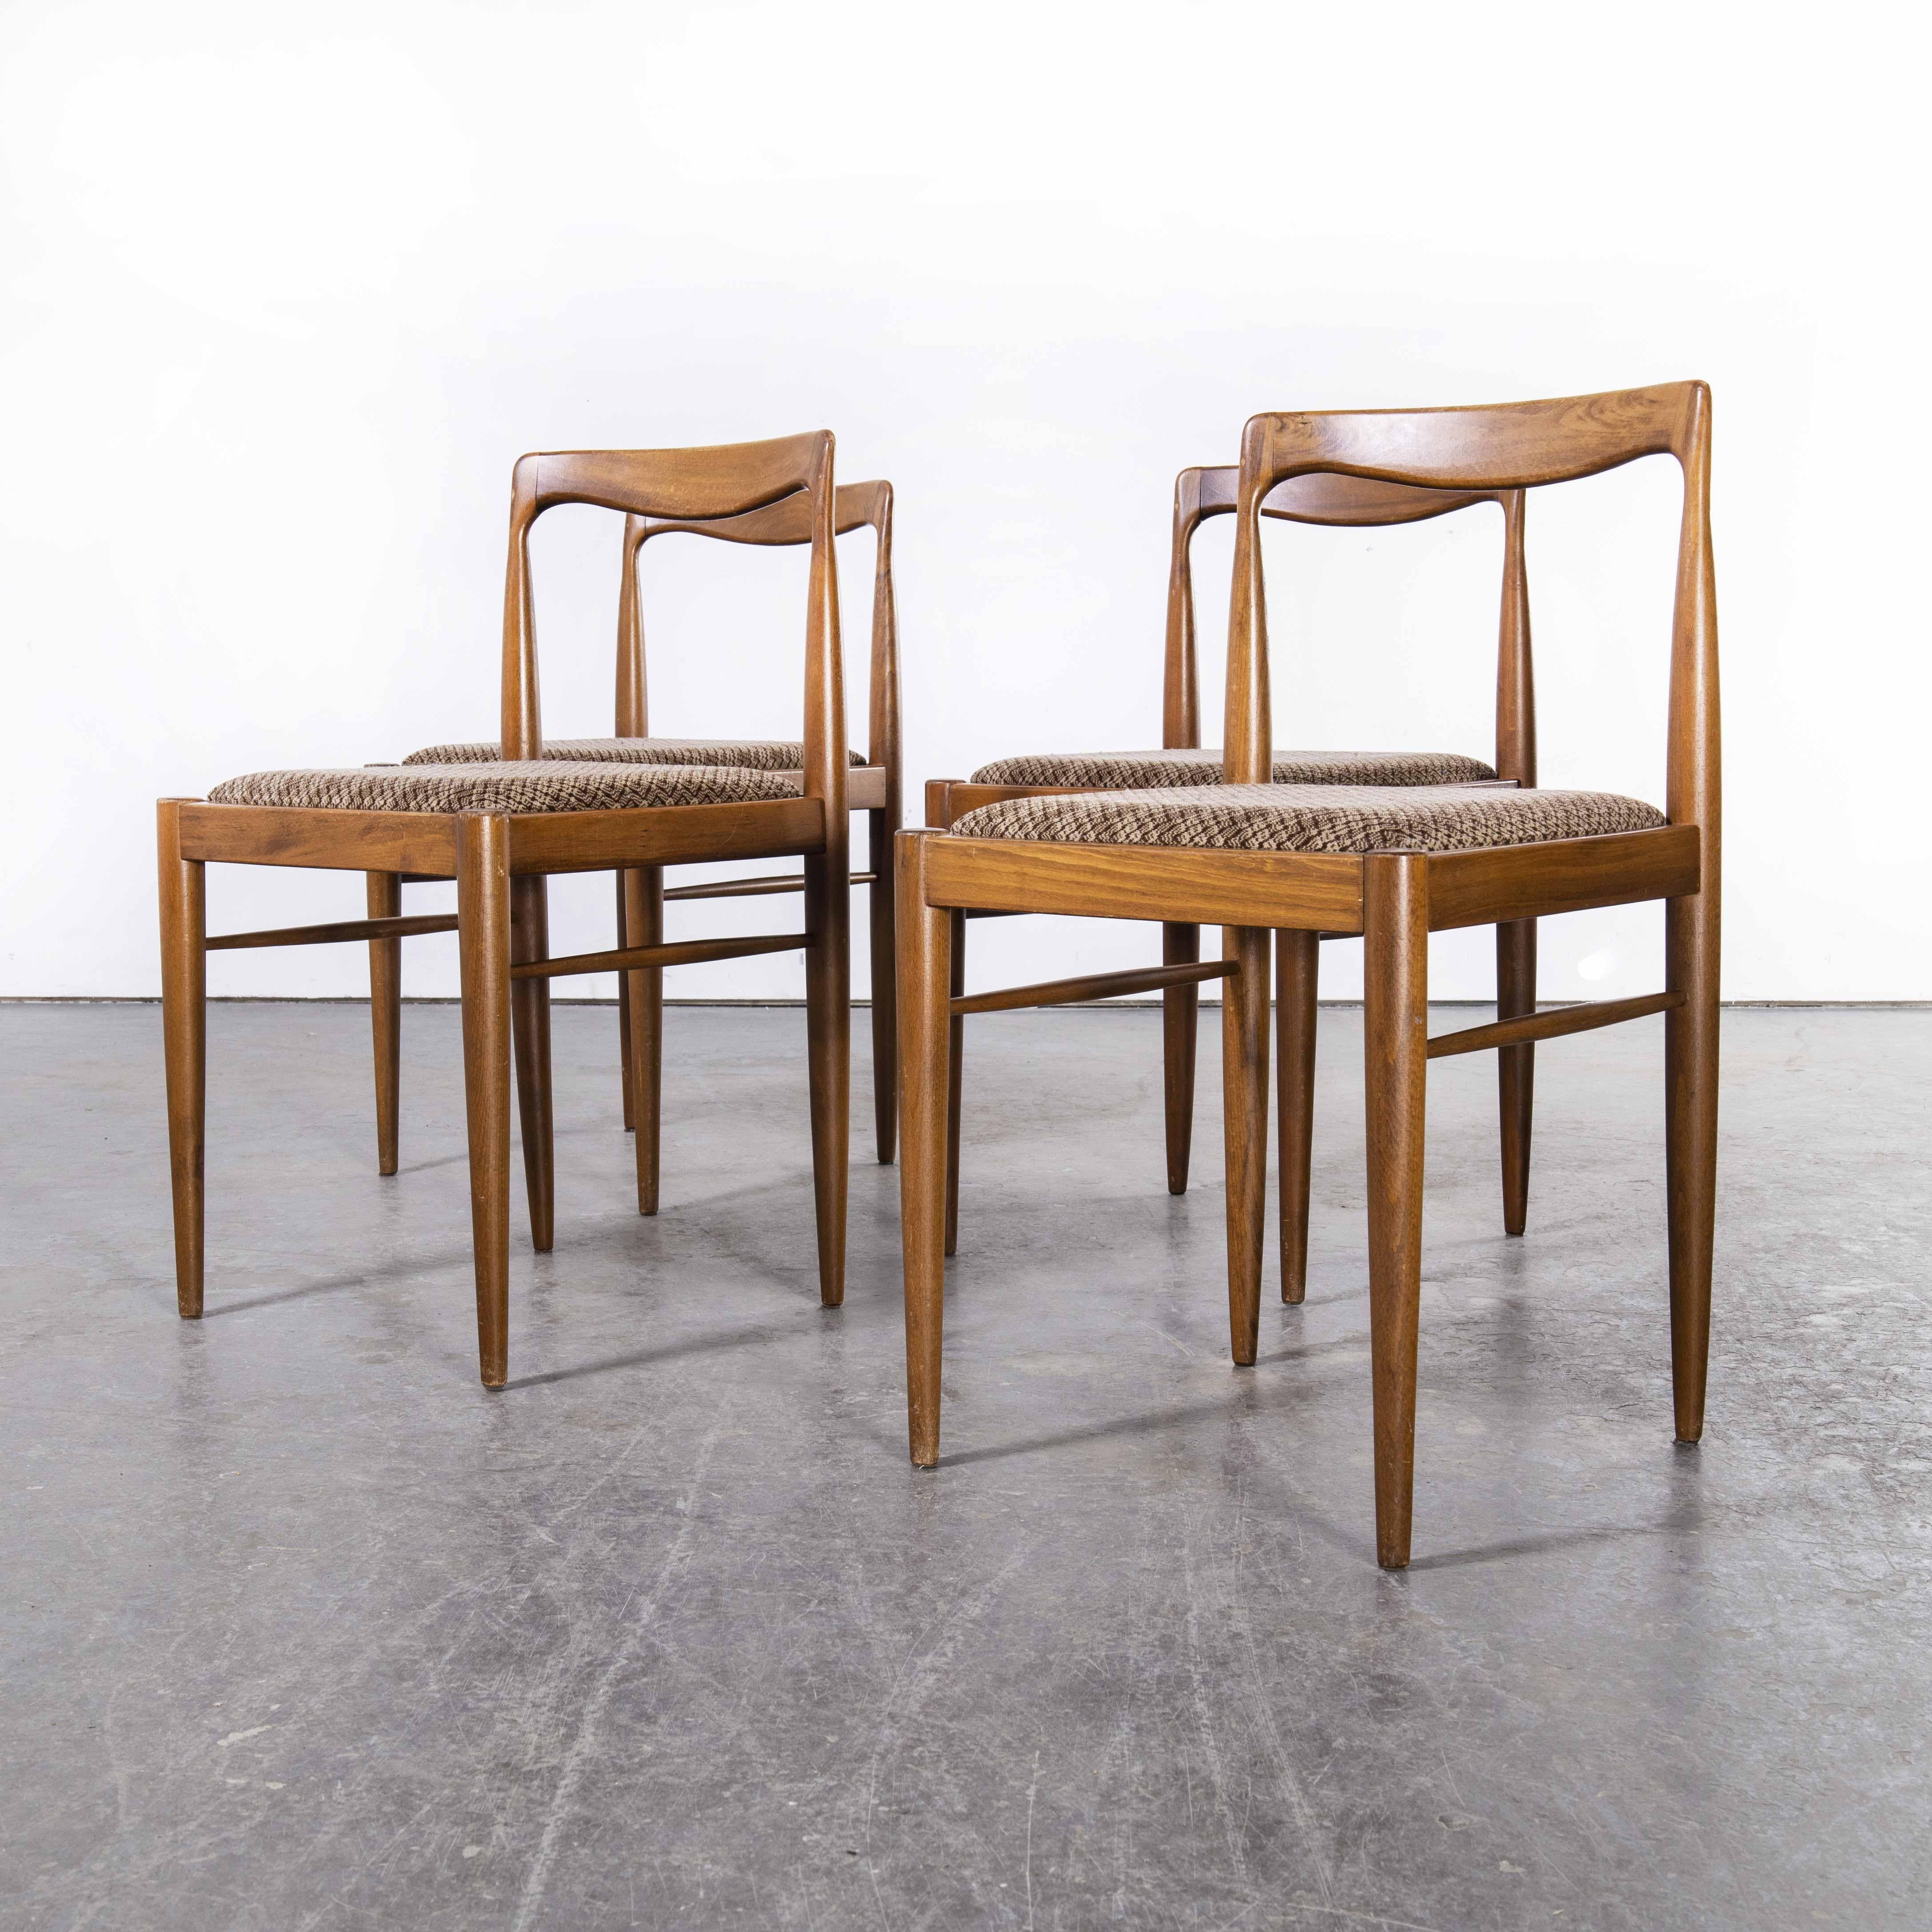 1950's Mid Century Teak Dining Chairs, Set of Four For Sale 1